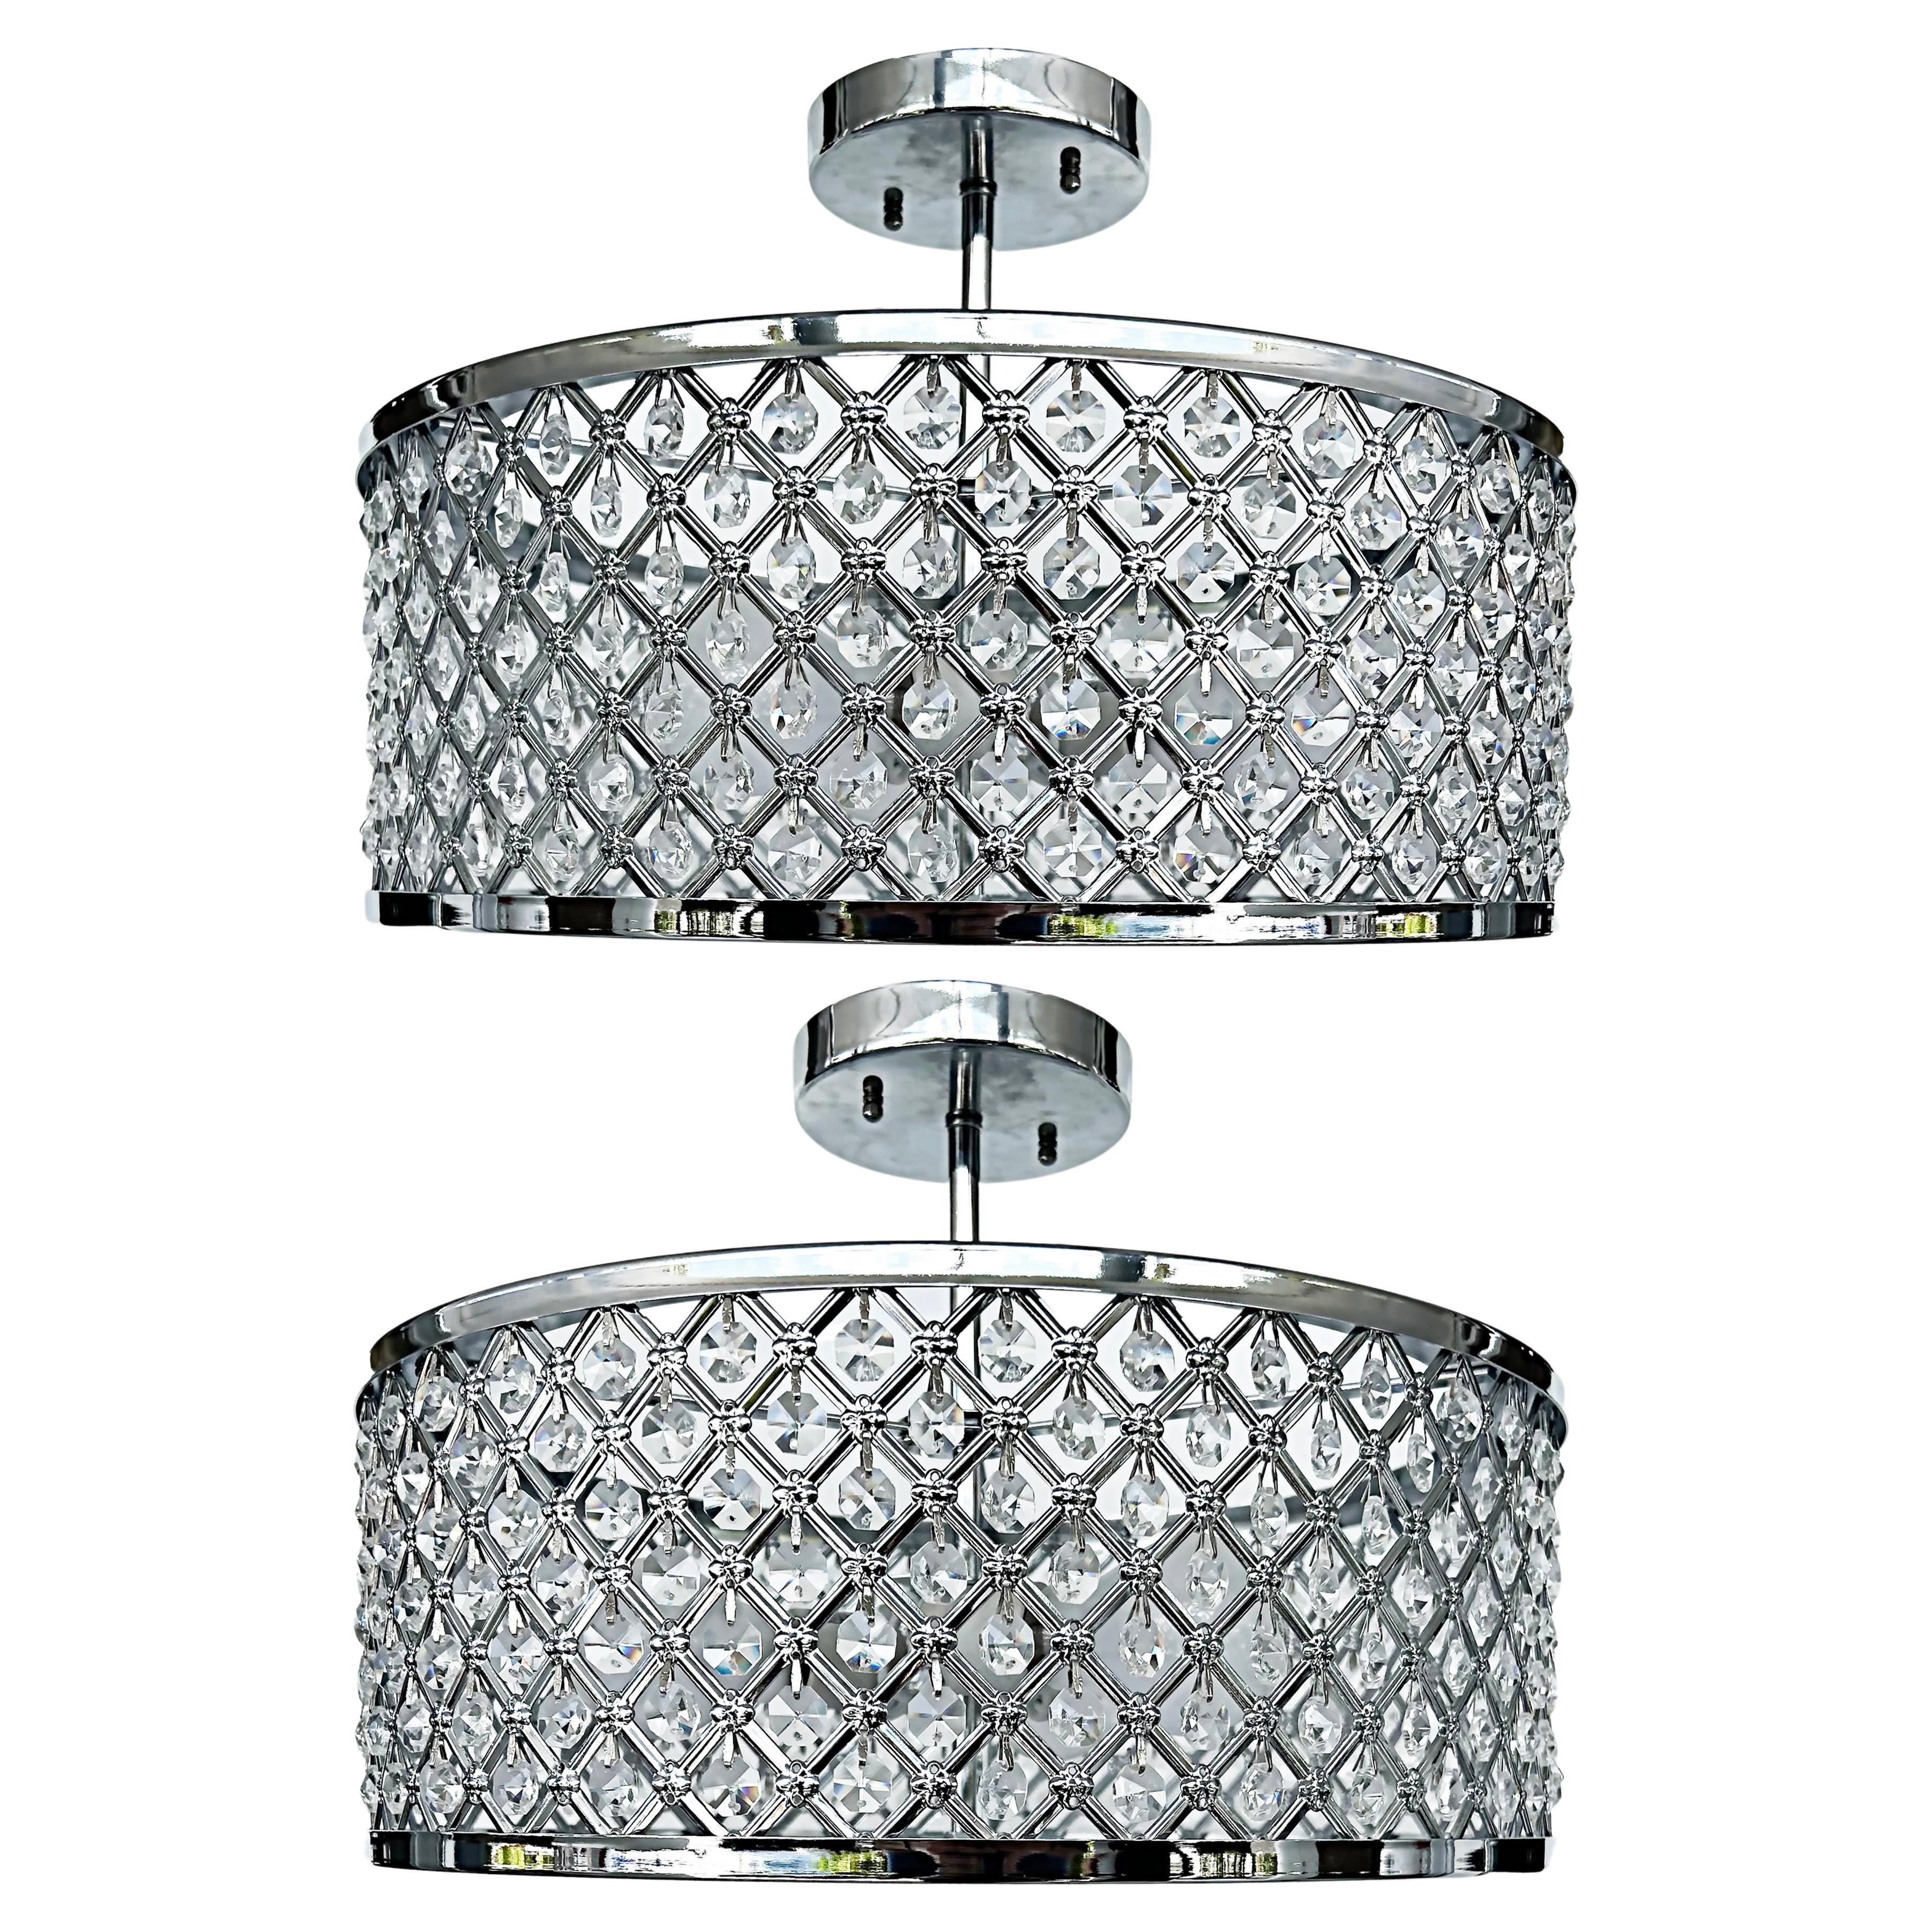 Cut Glass and Chrome Flush Mount Ceiling Light Fixture, One Available For Sale